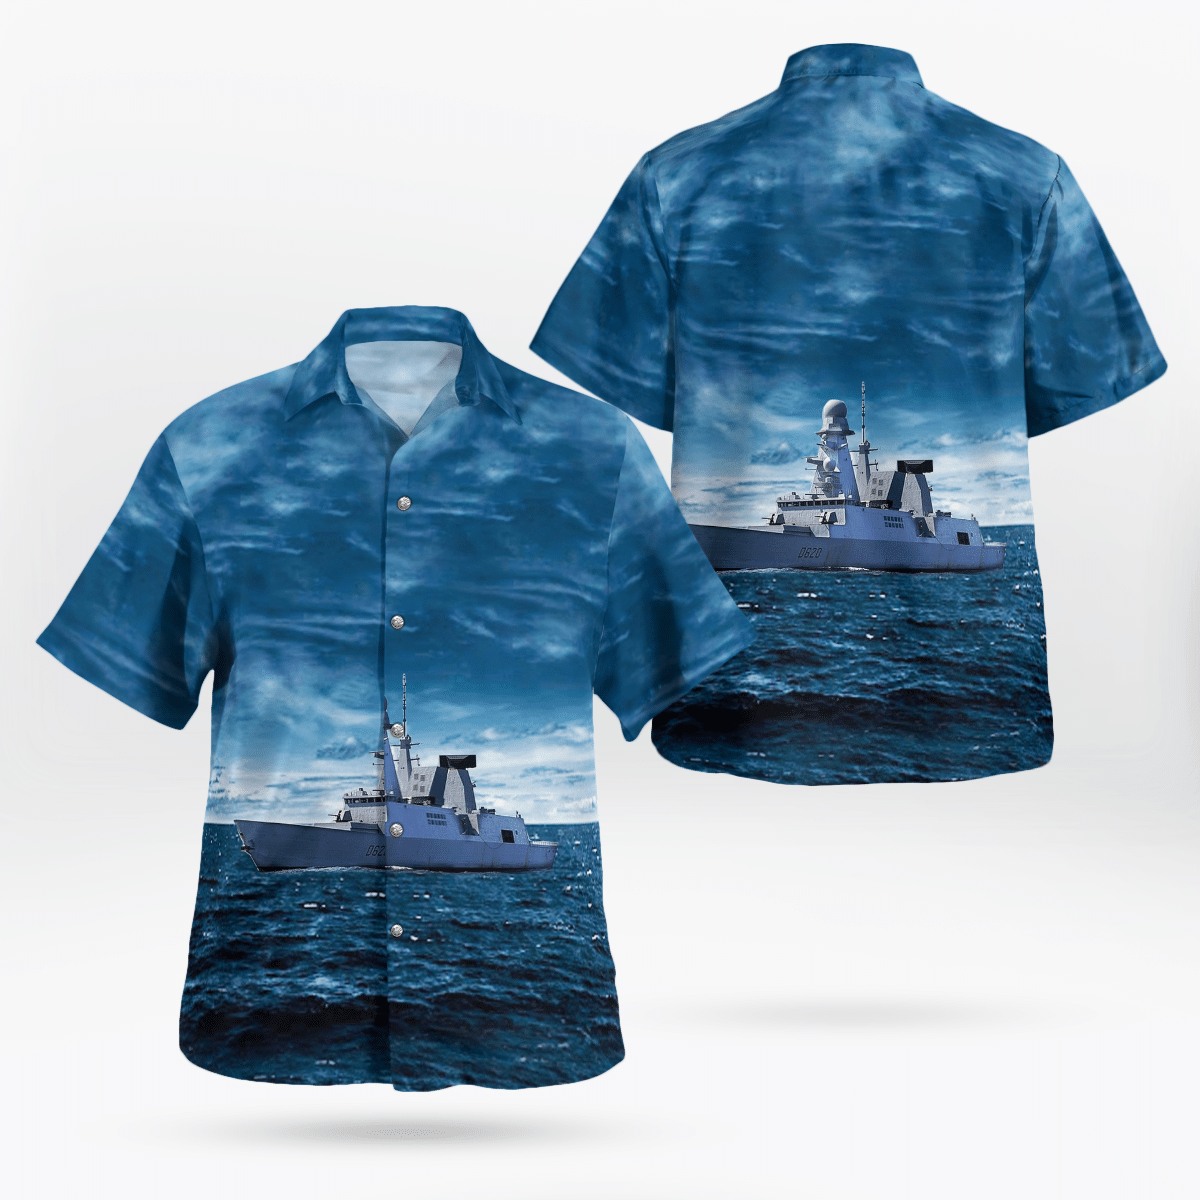 Some cool 3d hawaii shirt for this summer 28